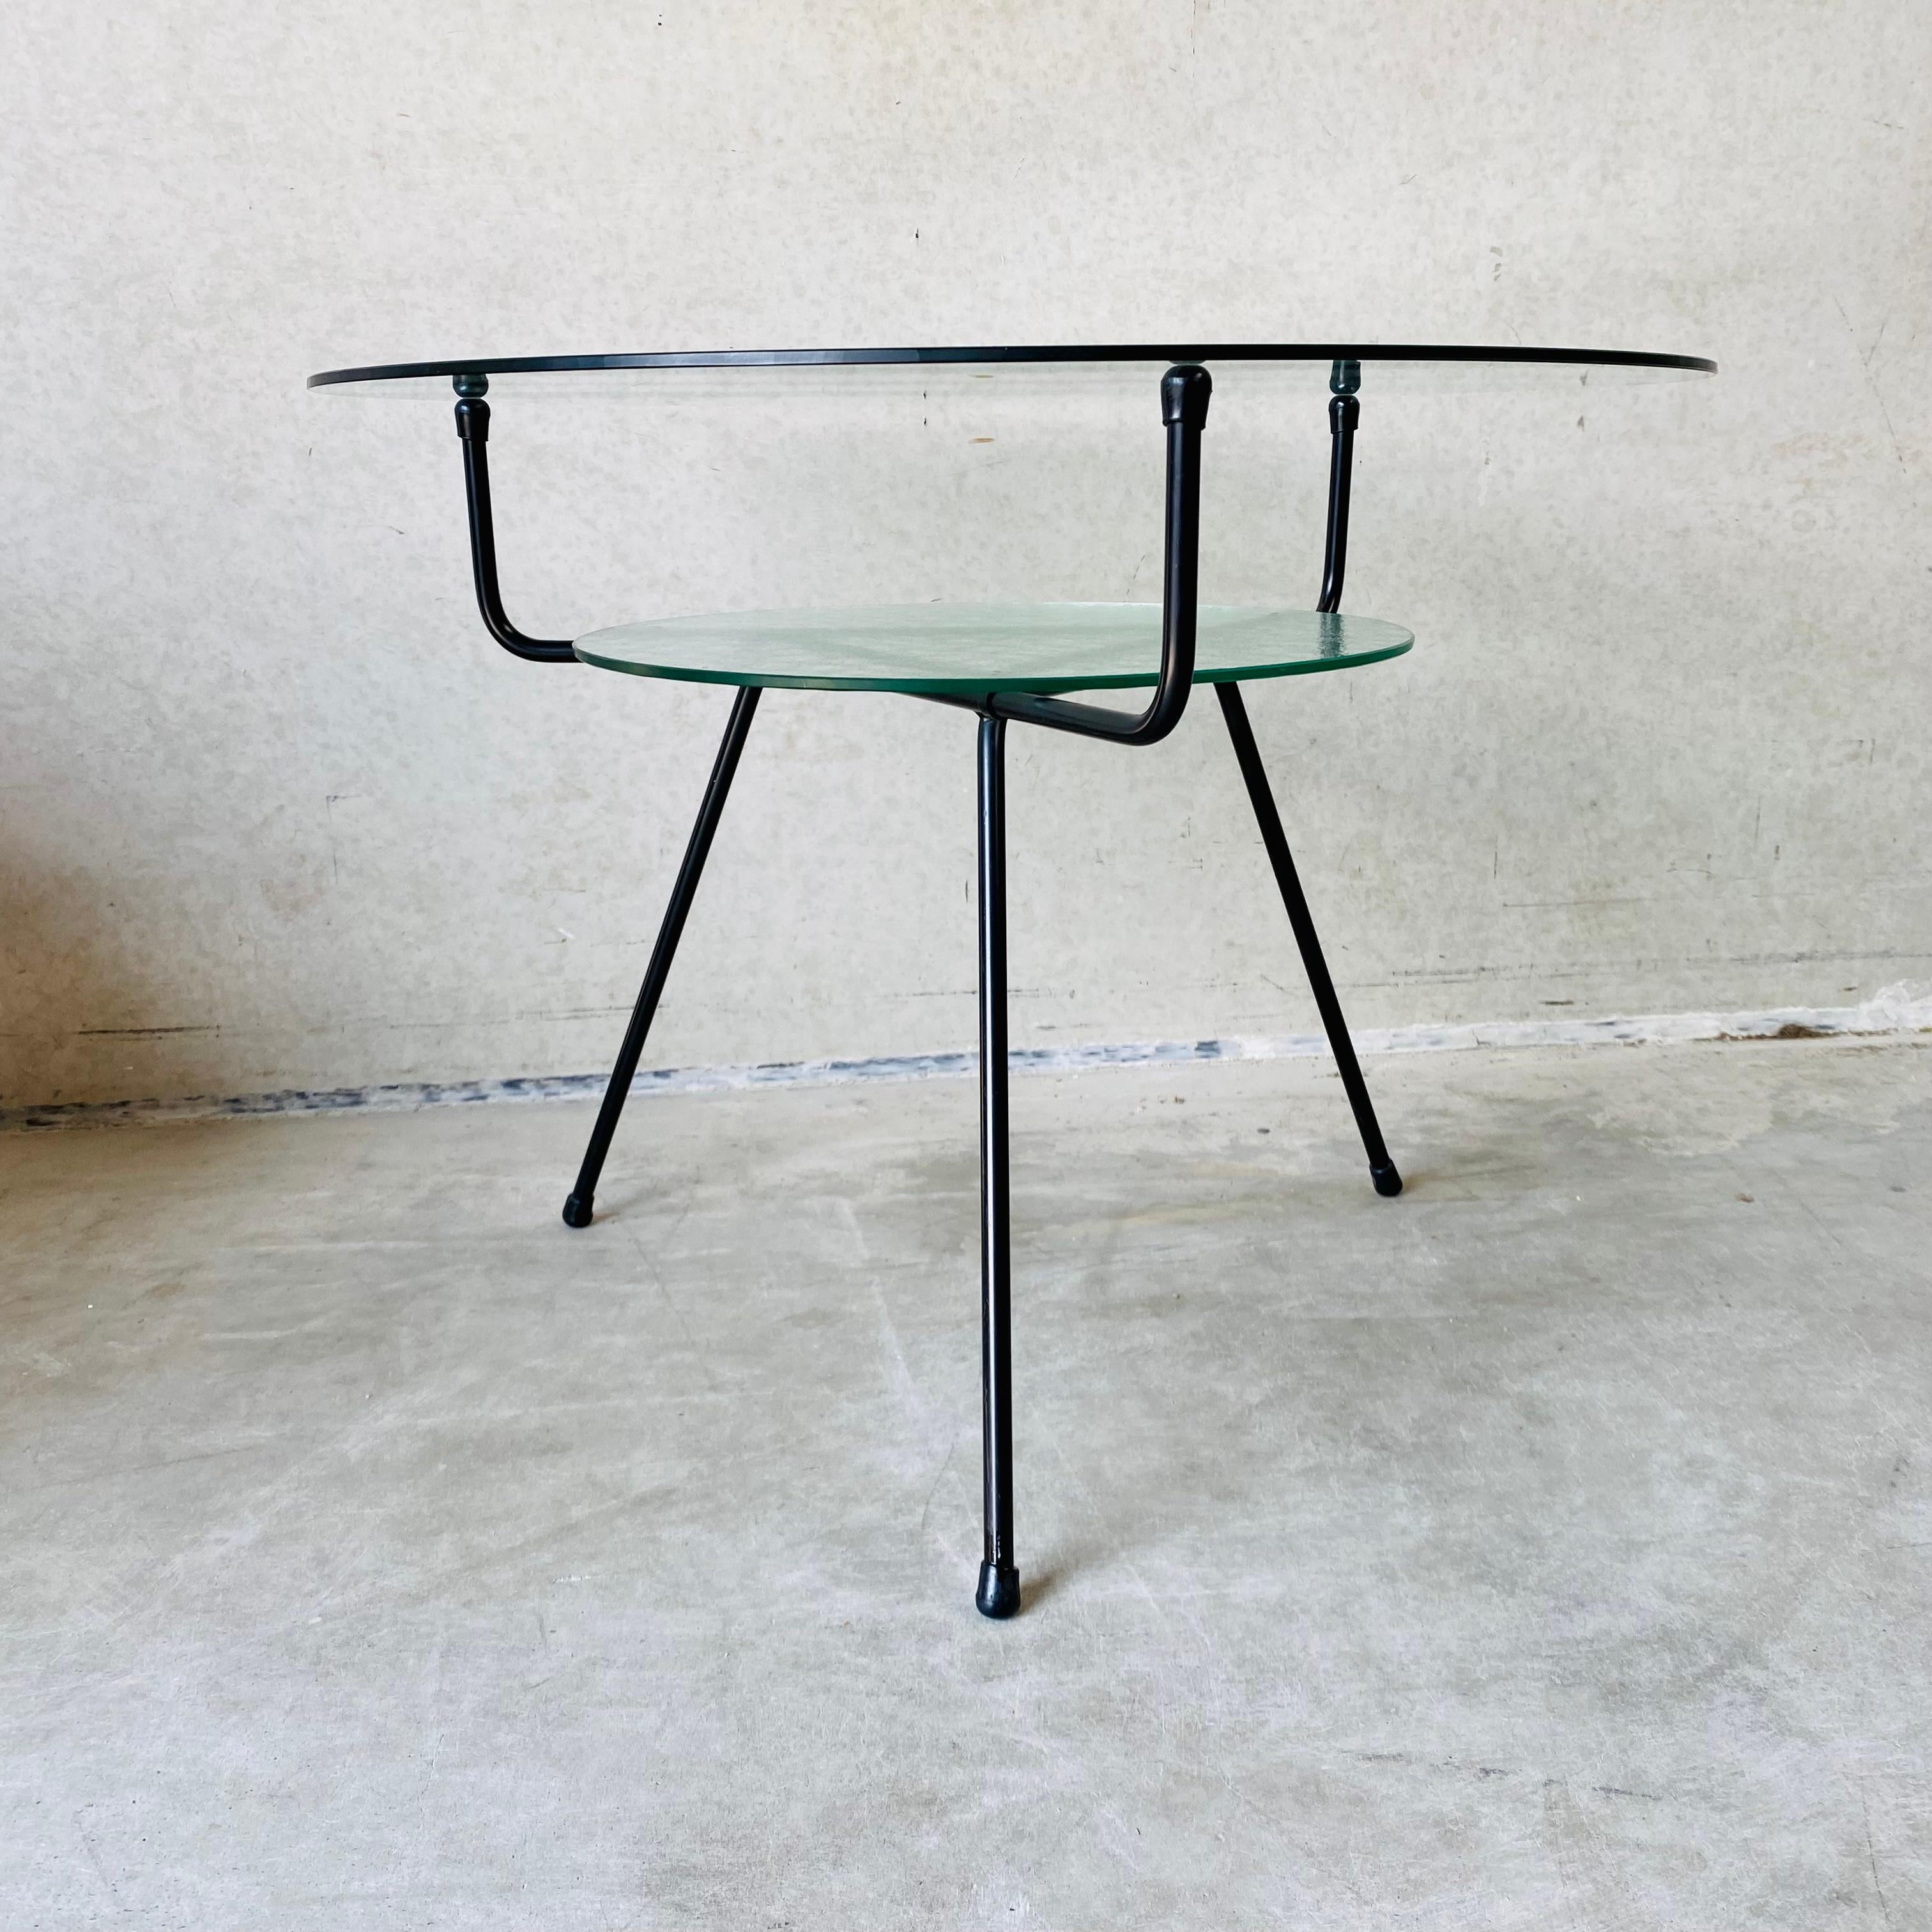 Mid-20th Century Mid-century Glass Coffee Table By W.H. Gispen For KEMBO, Dutch Design 1950 For Sale